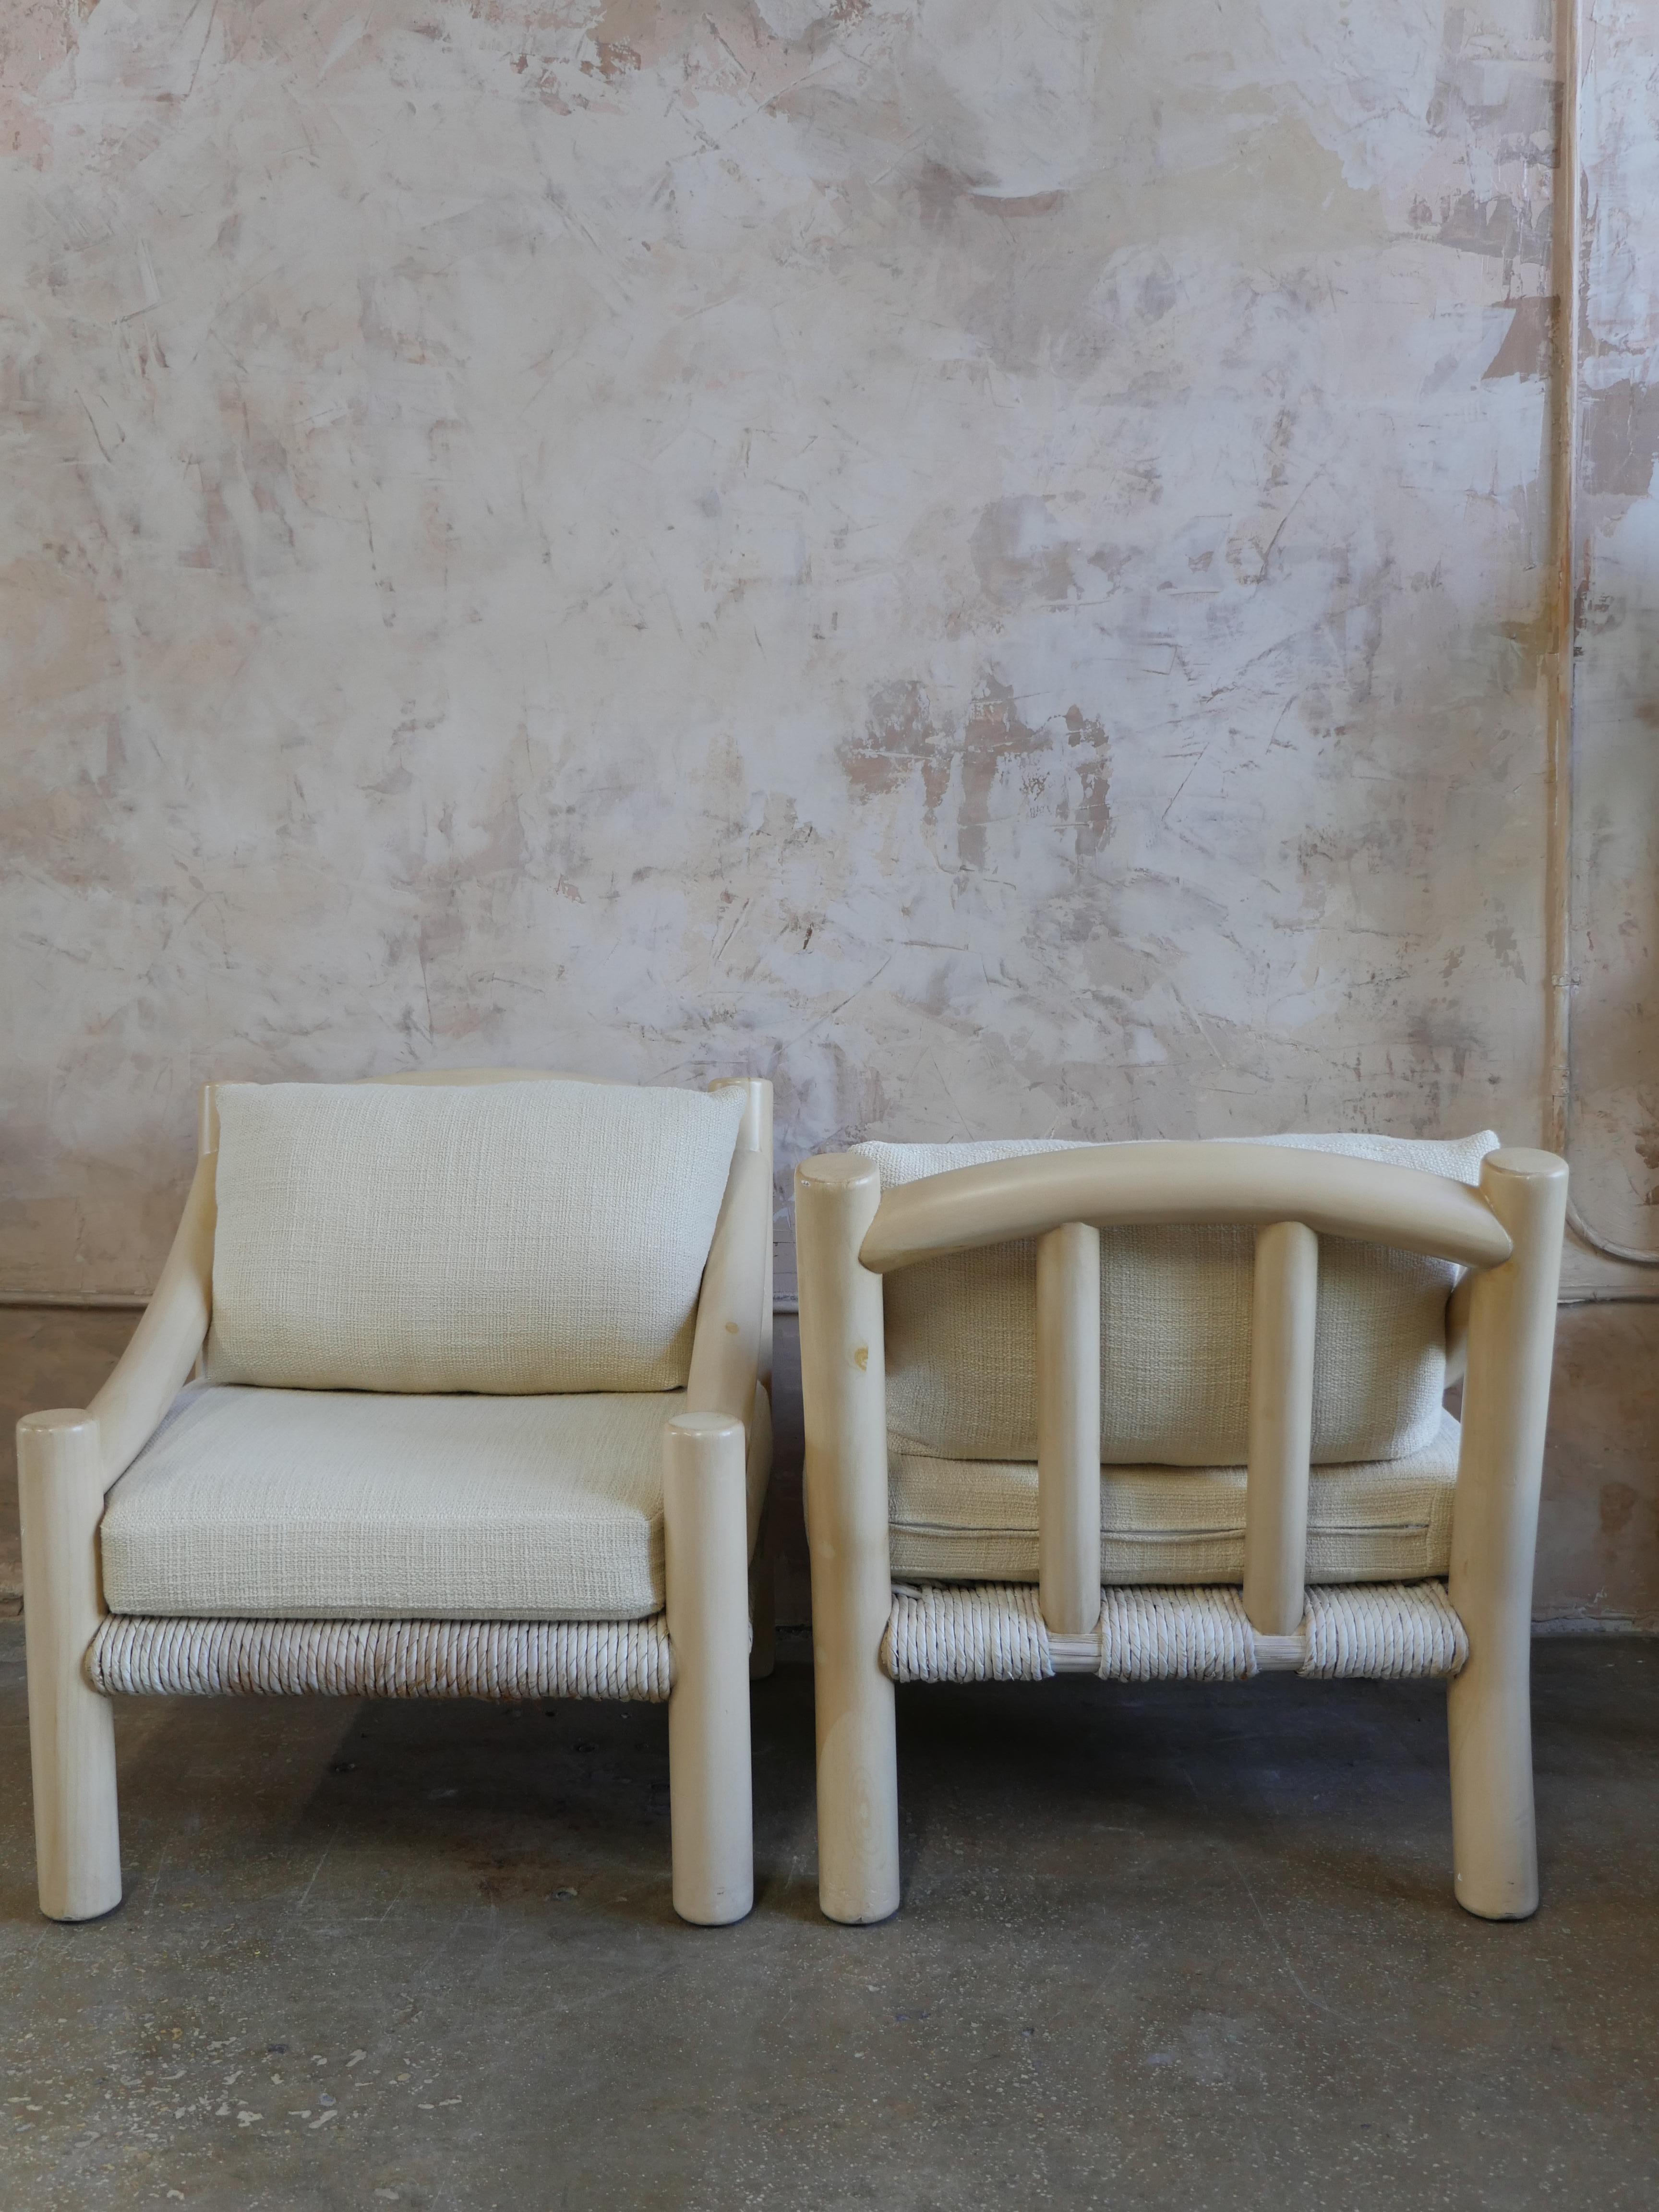 Beautiful pair of vintage 1980s Michael Taylor teak wood lounge chairs with luxurious linen upholstery by Elitis. The chairs chunky off-white lacquered teak wood frames our complemented nicely by the elegant Elitis linen and brand new cushions that